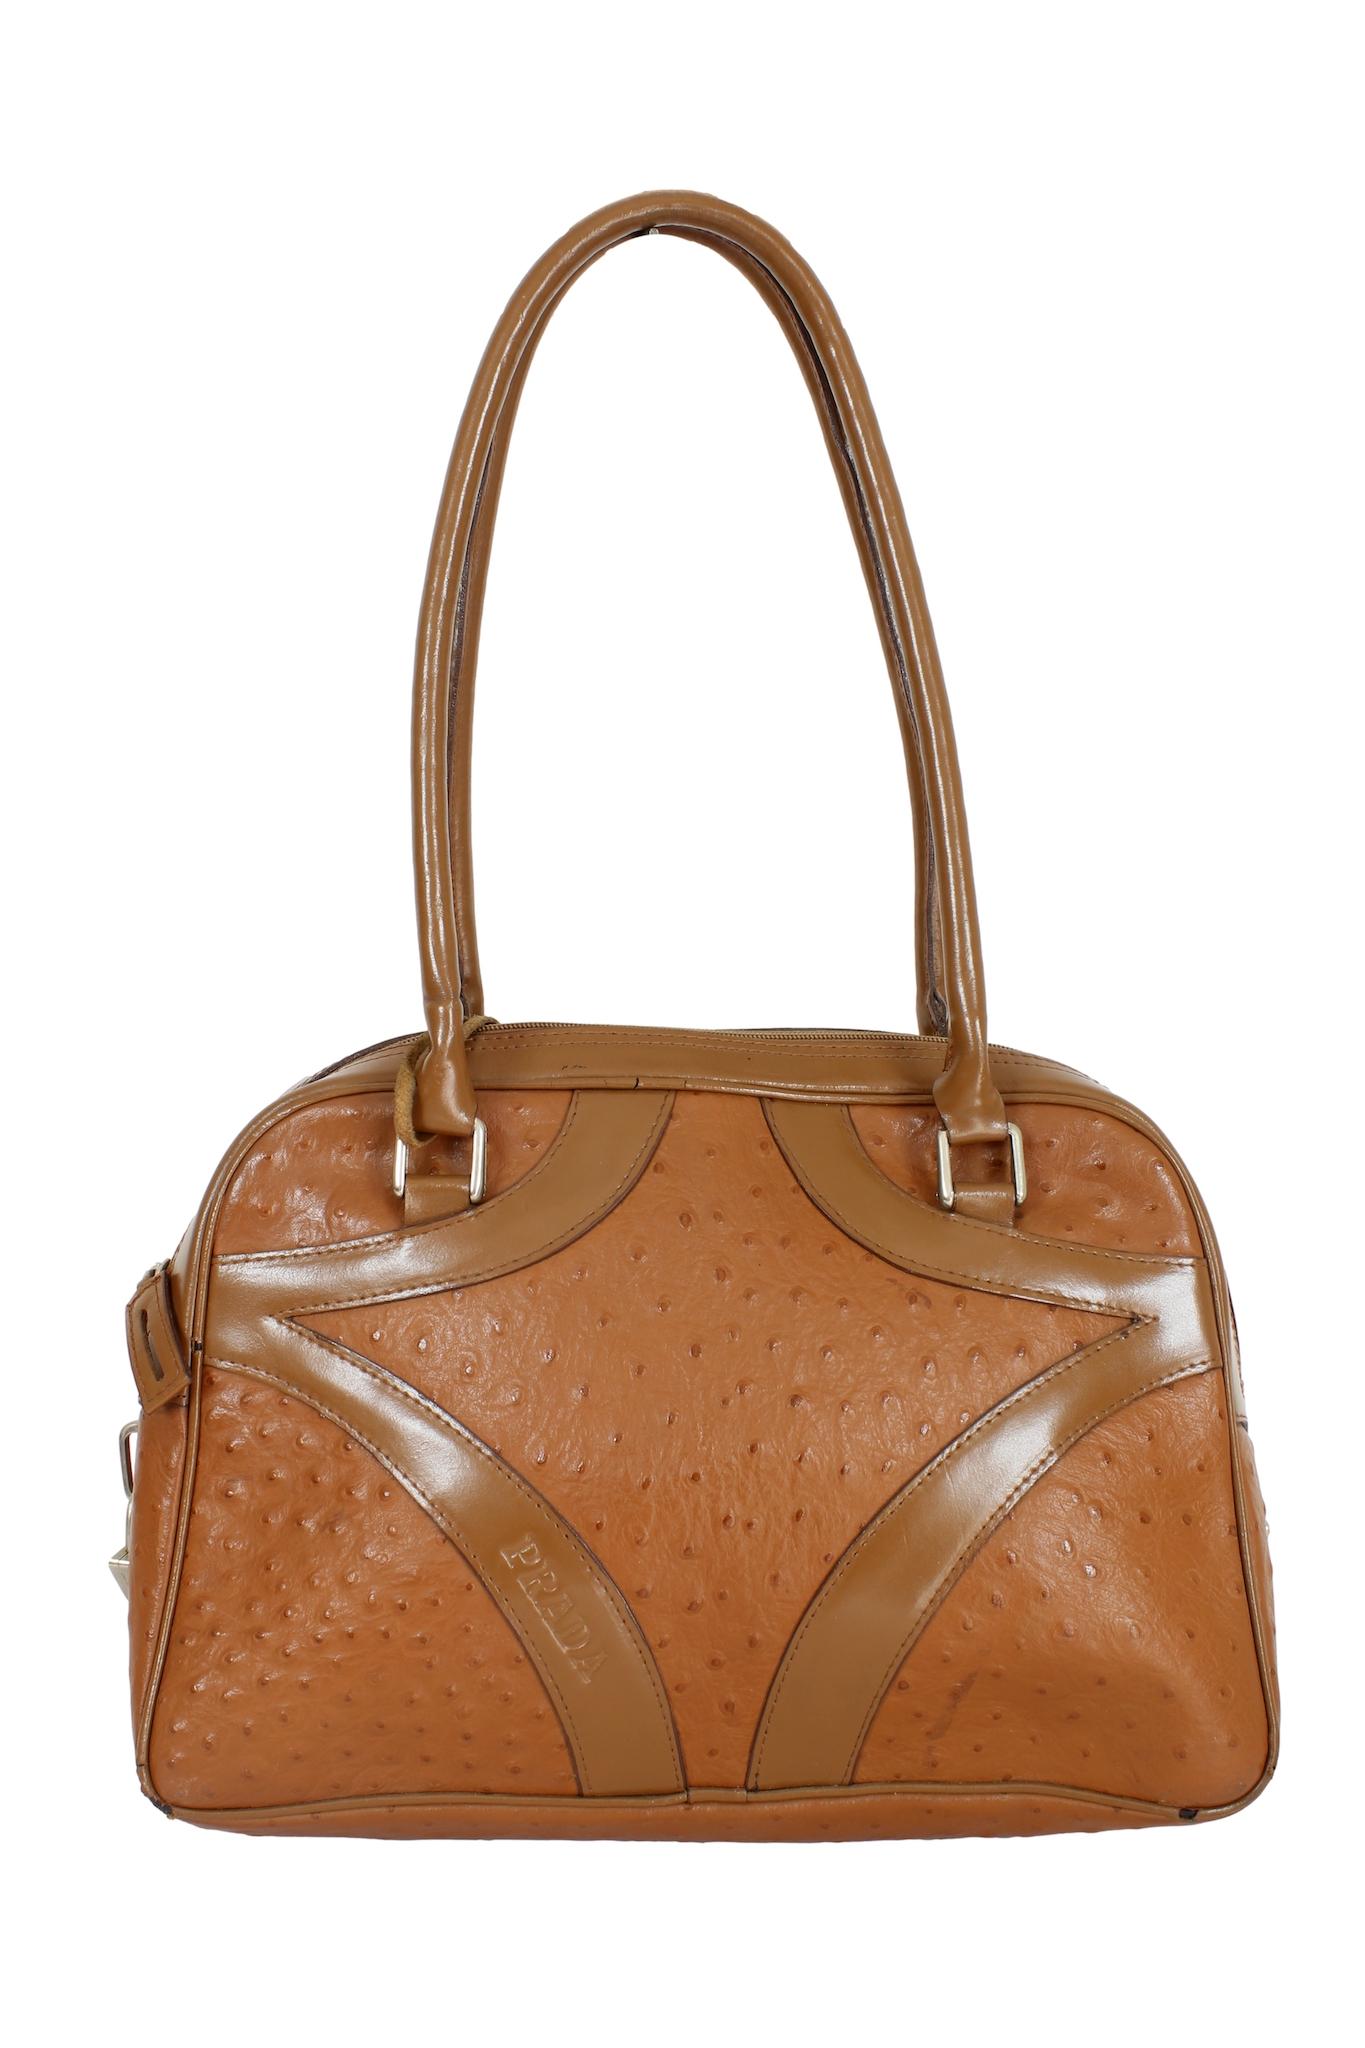 Prada Brown Ostrich Leather Vintage Plain Bag 1990s In Good Condition For Sale In Brindisi, Bt